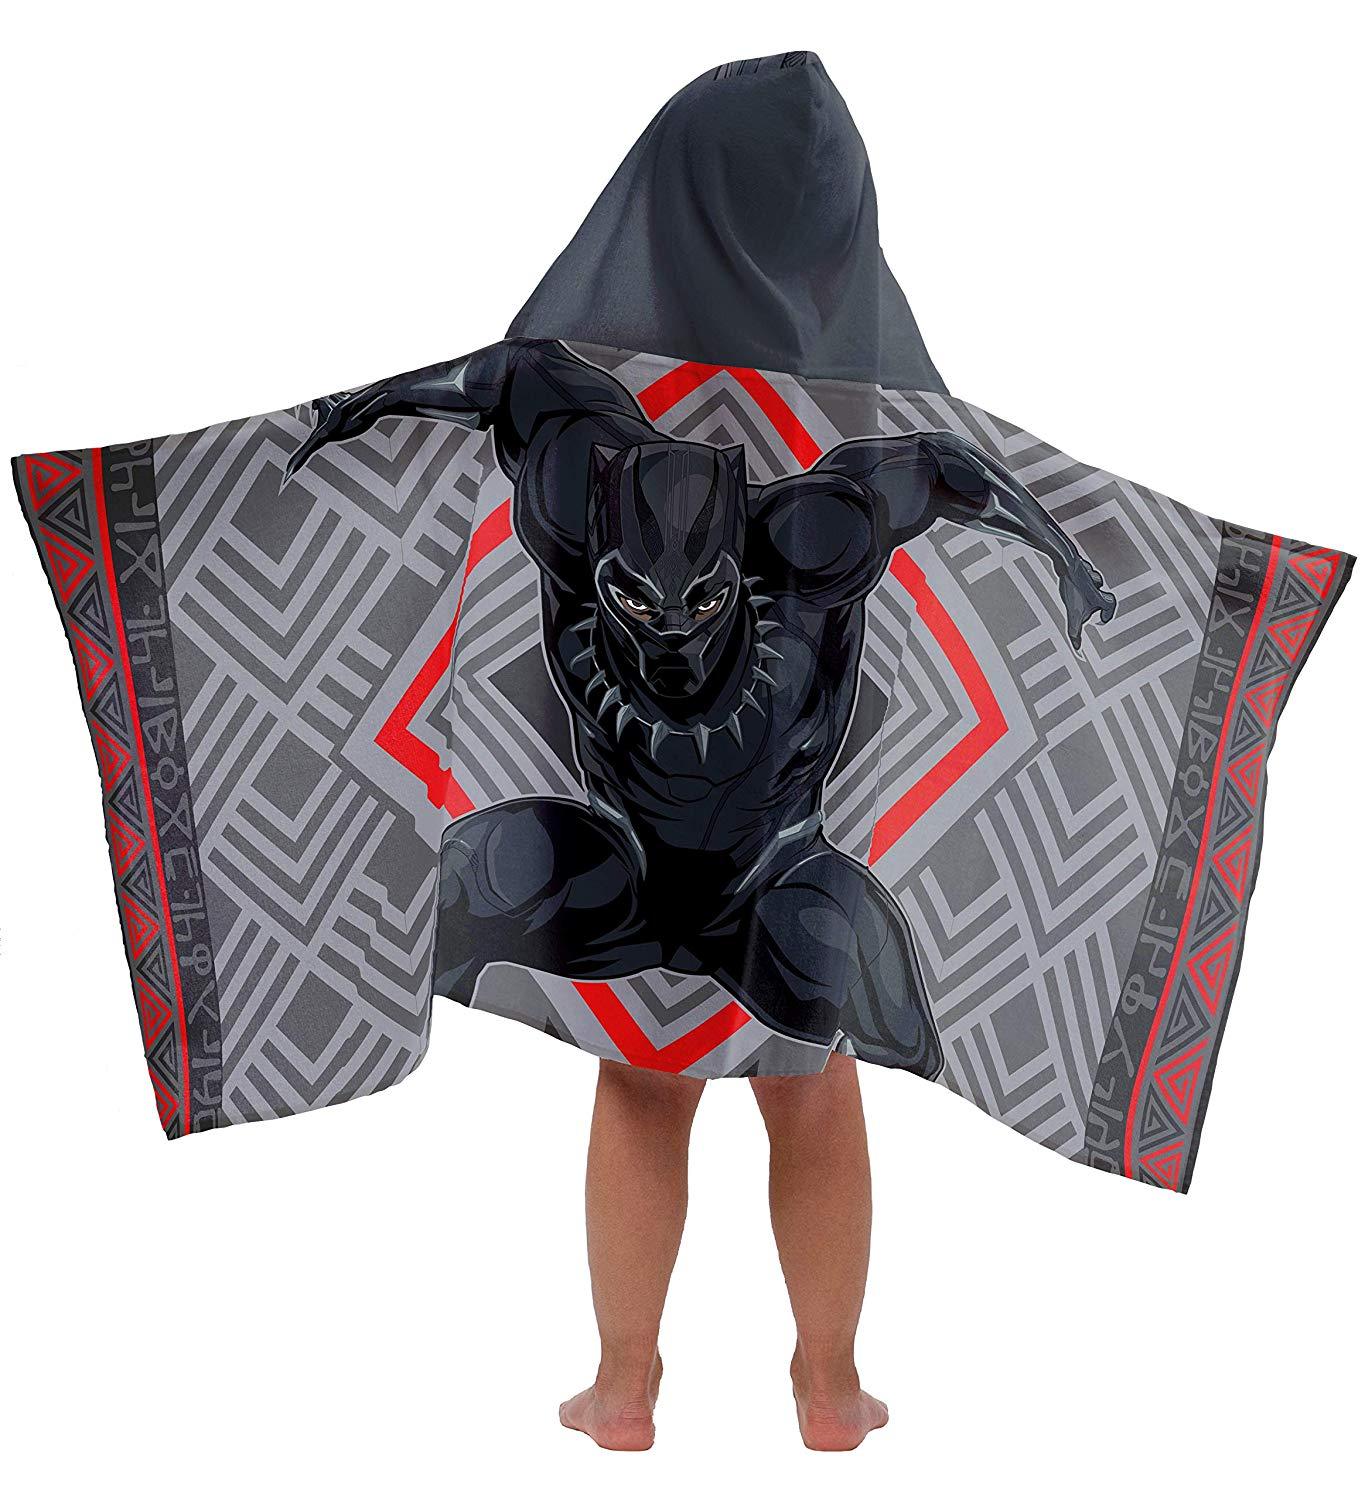 Jay Franco Marvel Black Panther Kids Bath/Pool/Beach Hooded Towel - Super Soft & Absorbent Fade Resistant Cotton Towel, Measuring 22 inch x 51 inch (Official Marvel Product)